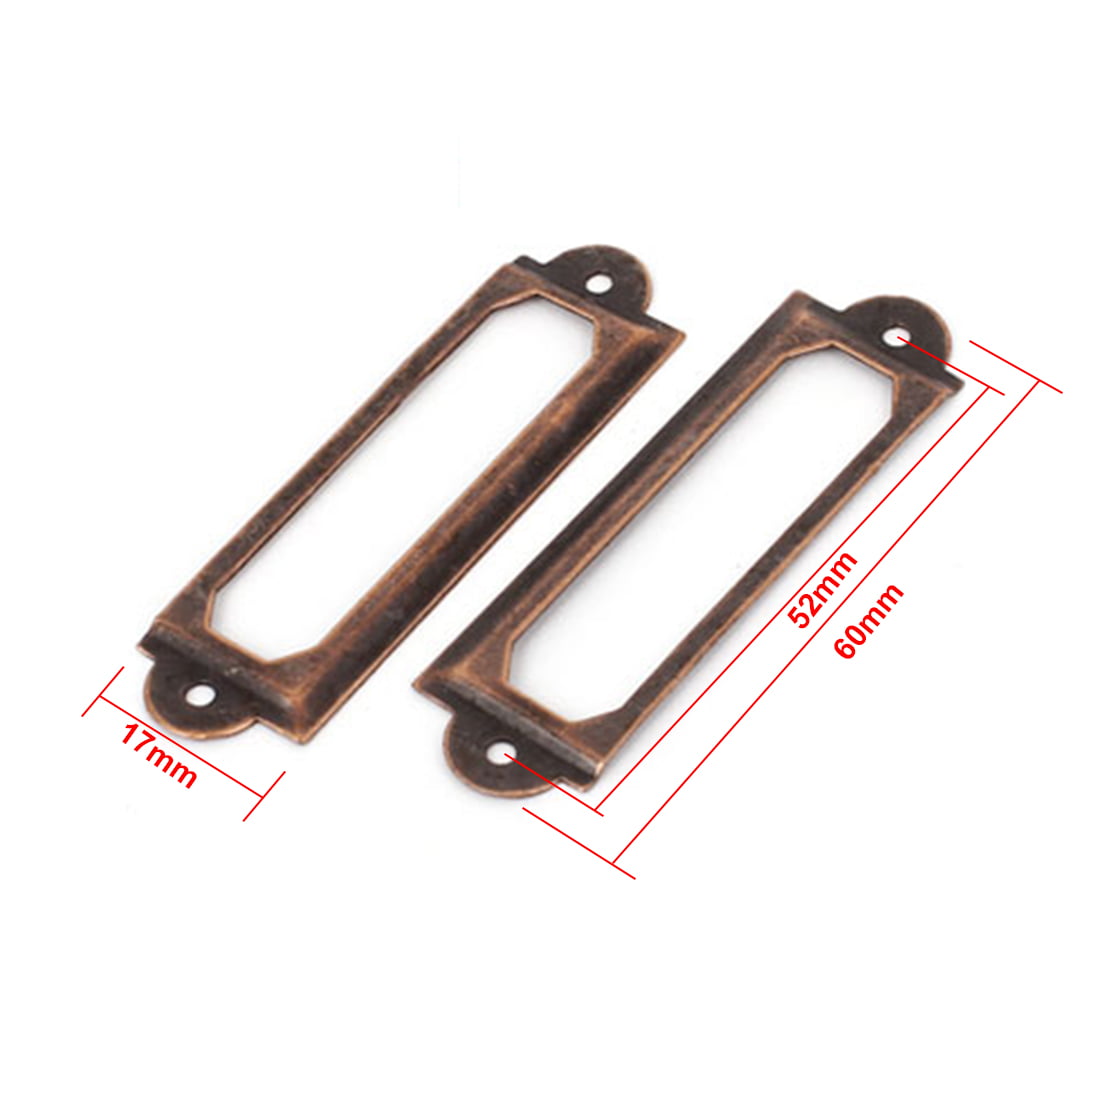 Saim Bronze Tone Metal Office Cabinet Library File Drawer Name Card Tag Label Holder Frames with Screws 4 Pcs 85 x 42mm